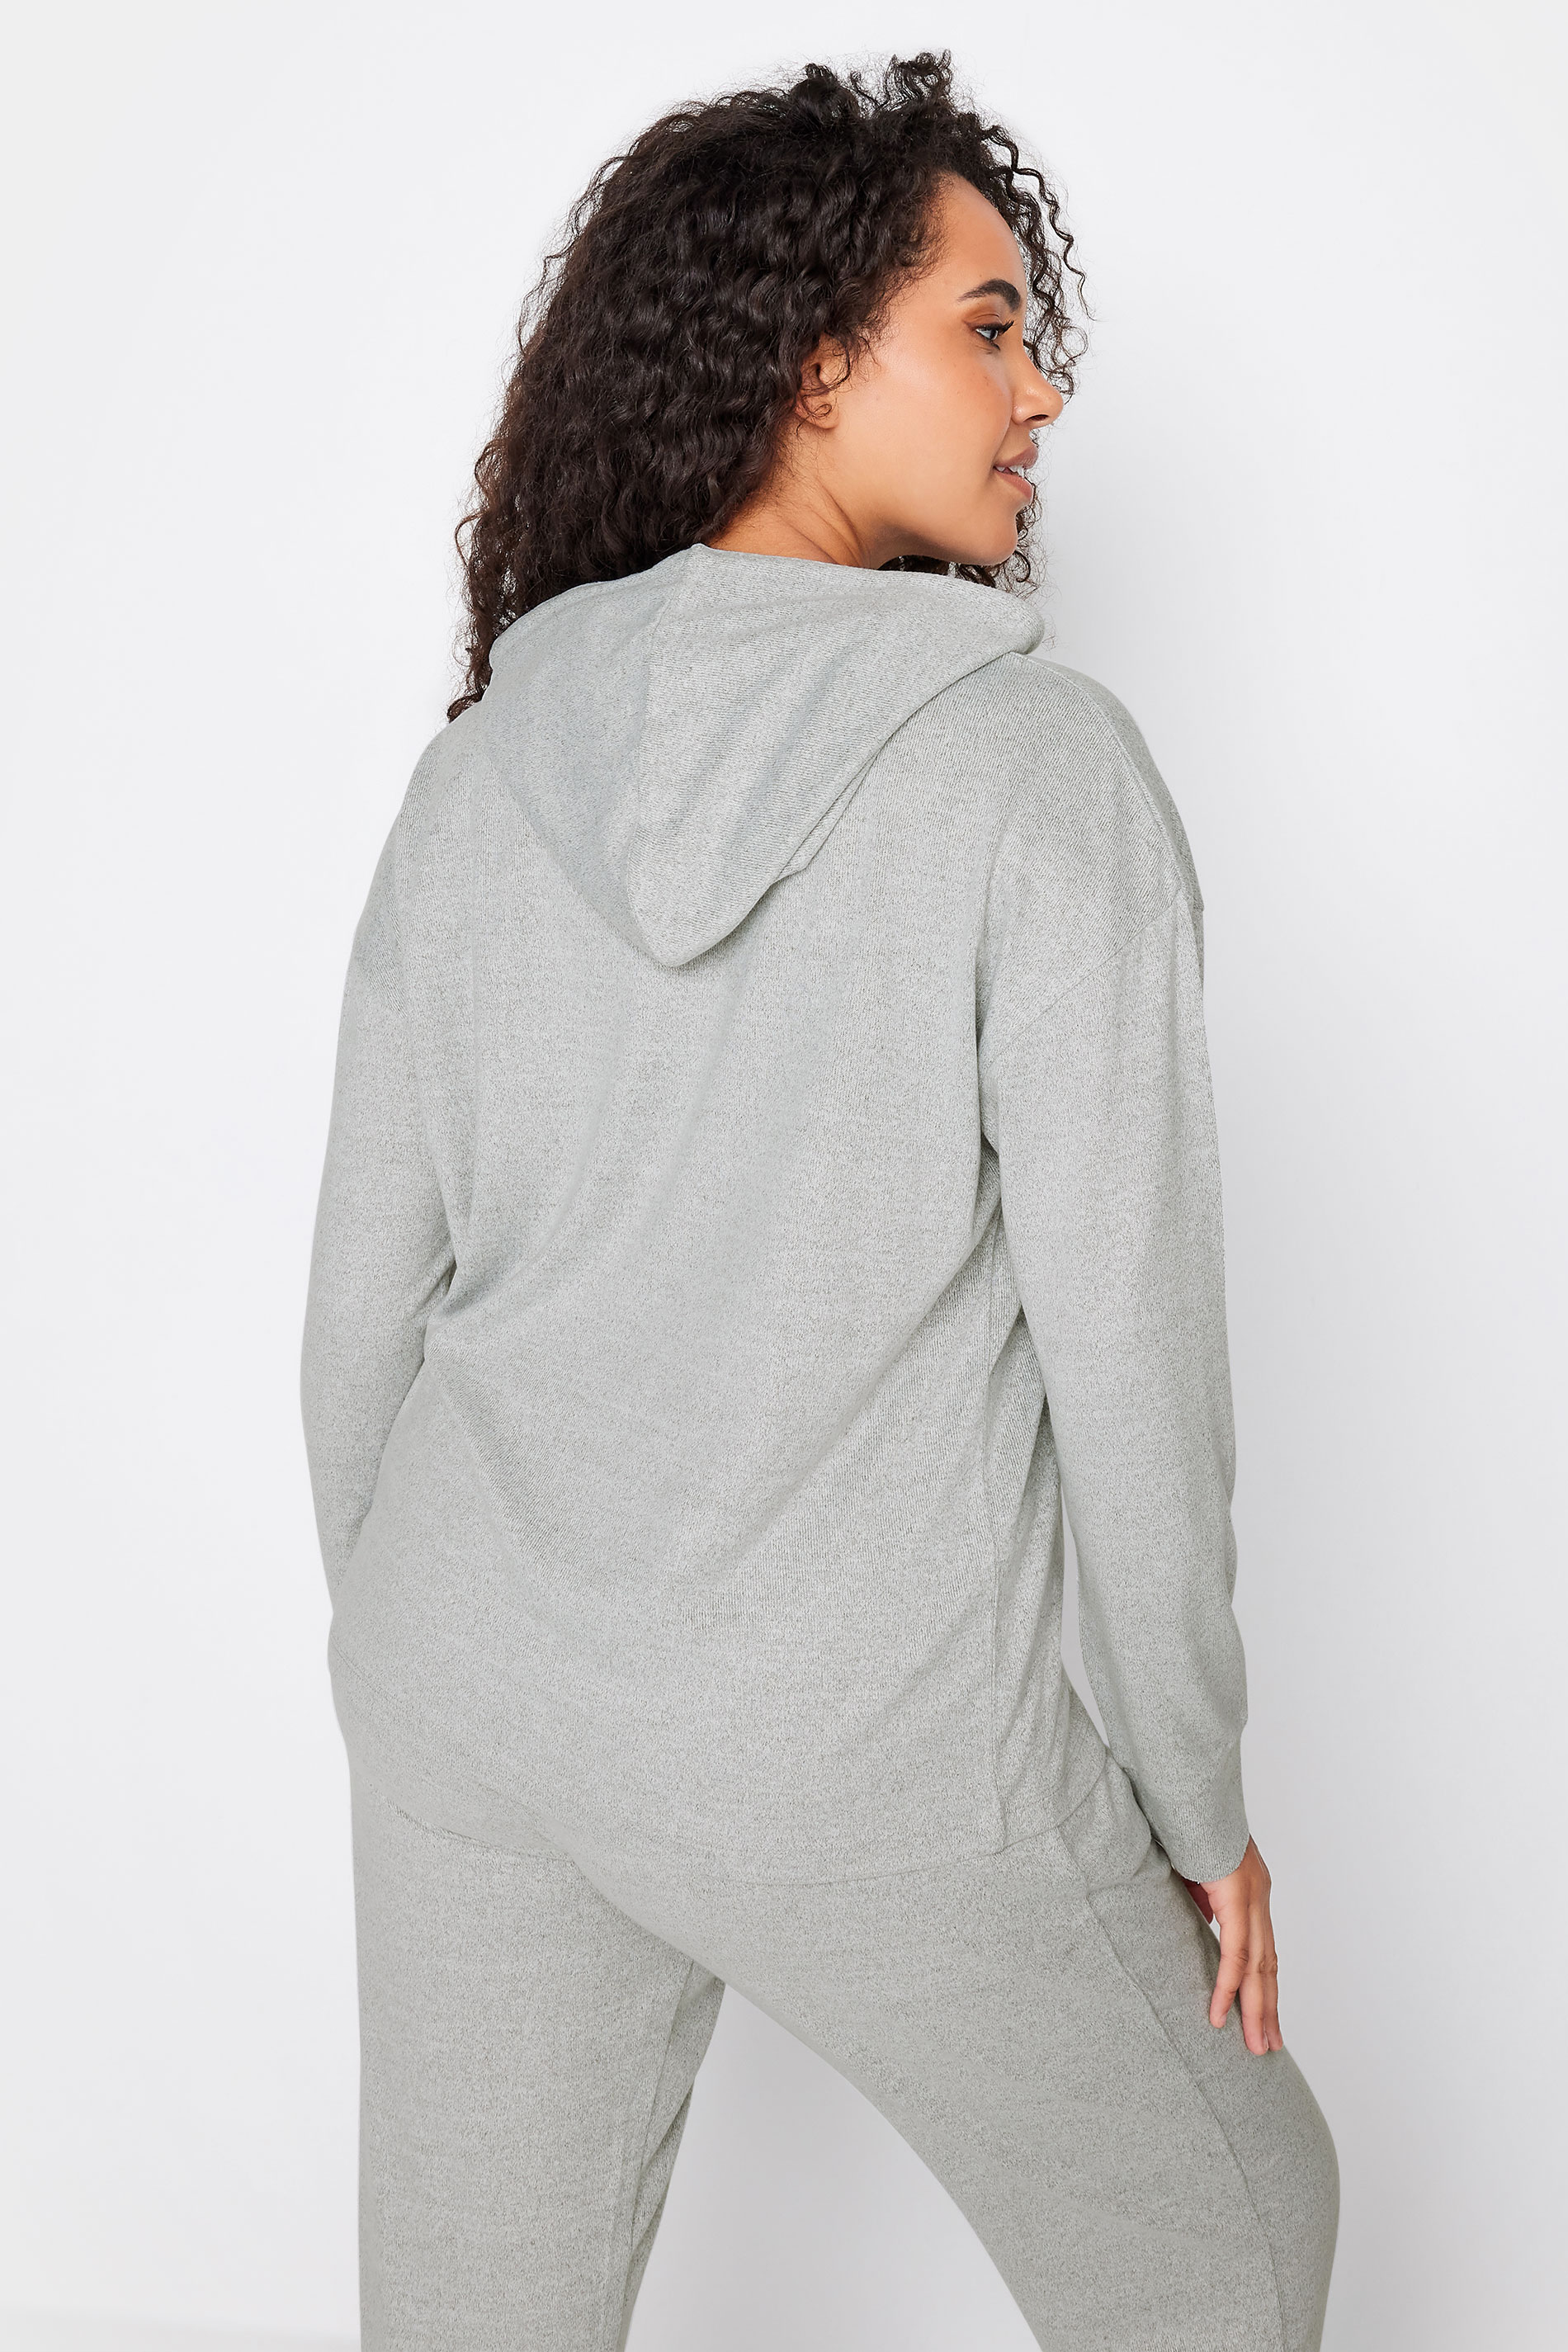 M&Co Grey Marl Soft Touch Lounge Hoodie | M&Co 3